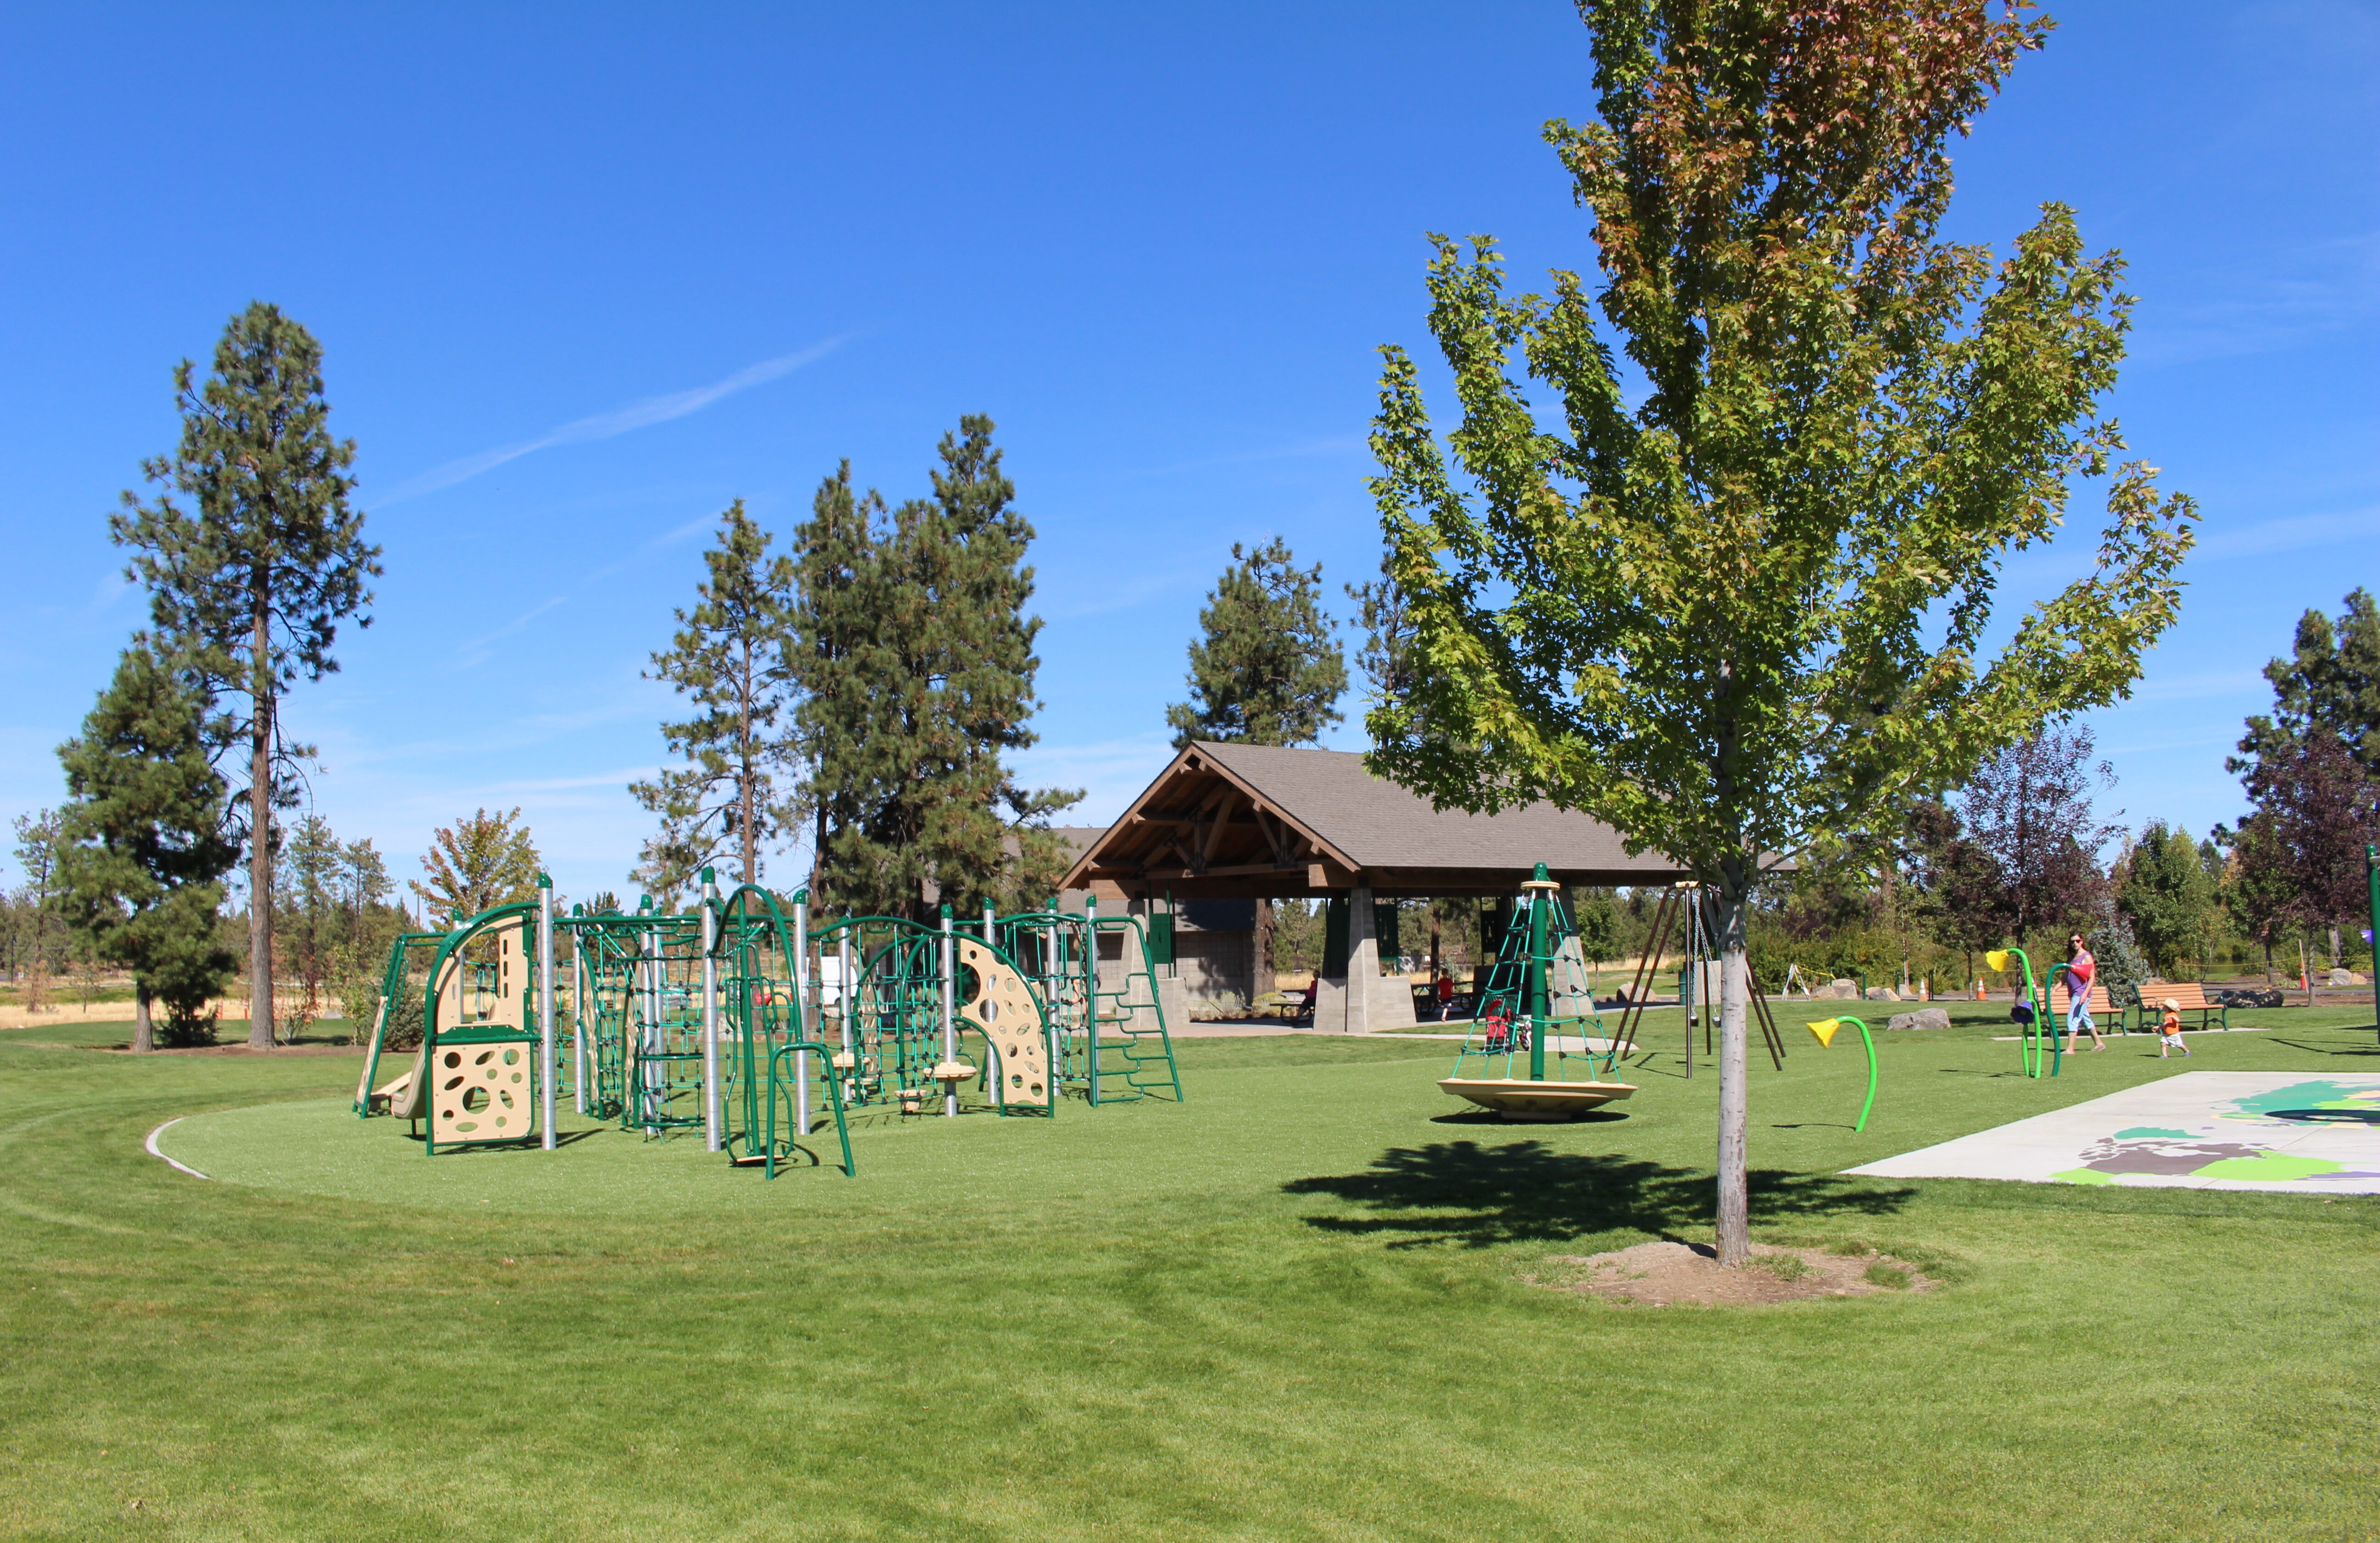 the playground and shelter at pine nursery